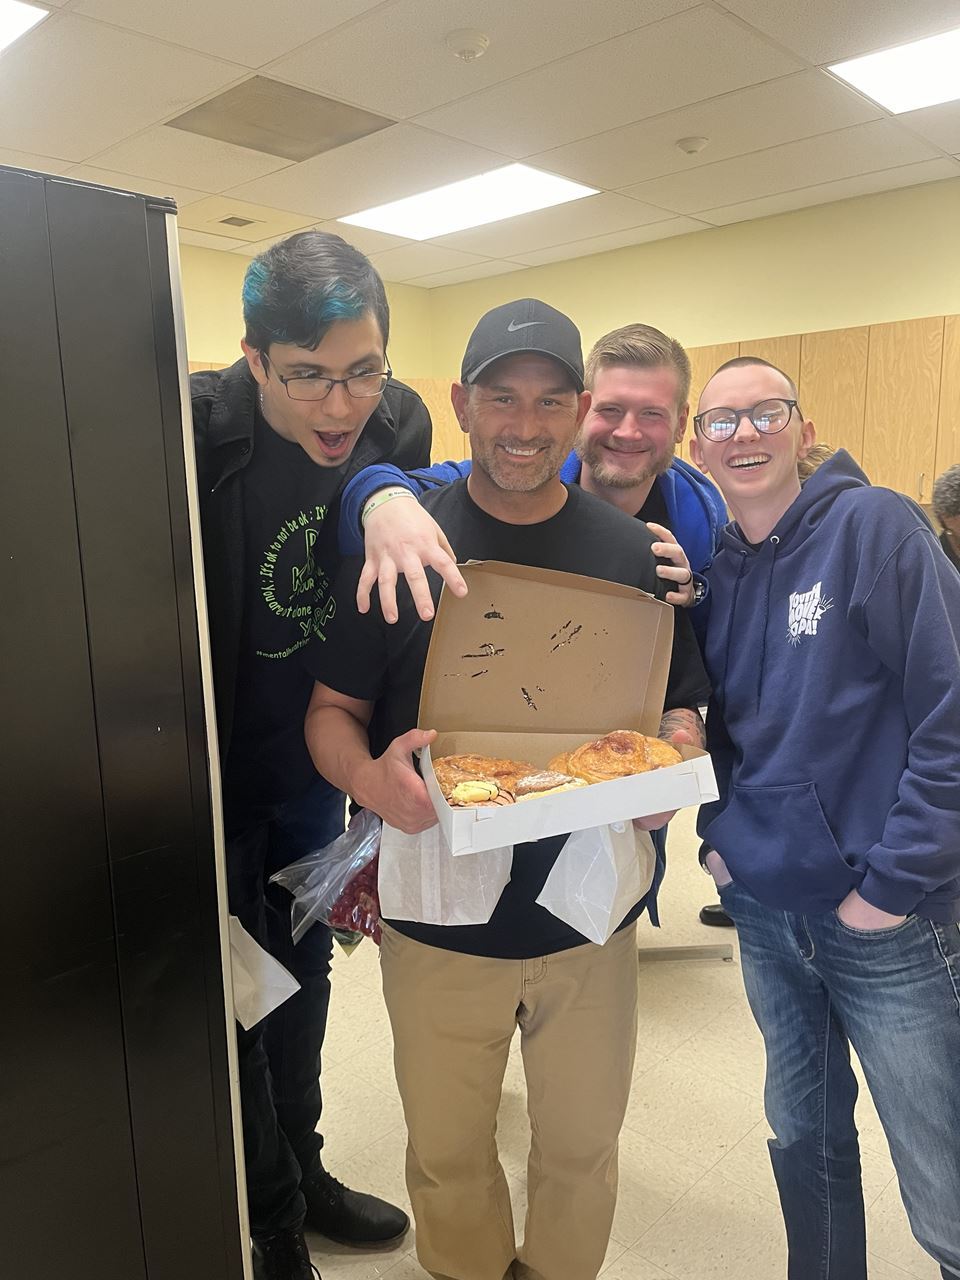 Four people smiling with a box of donuts